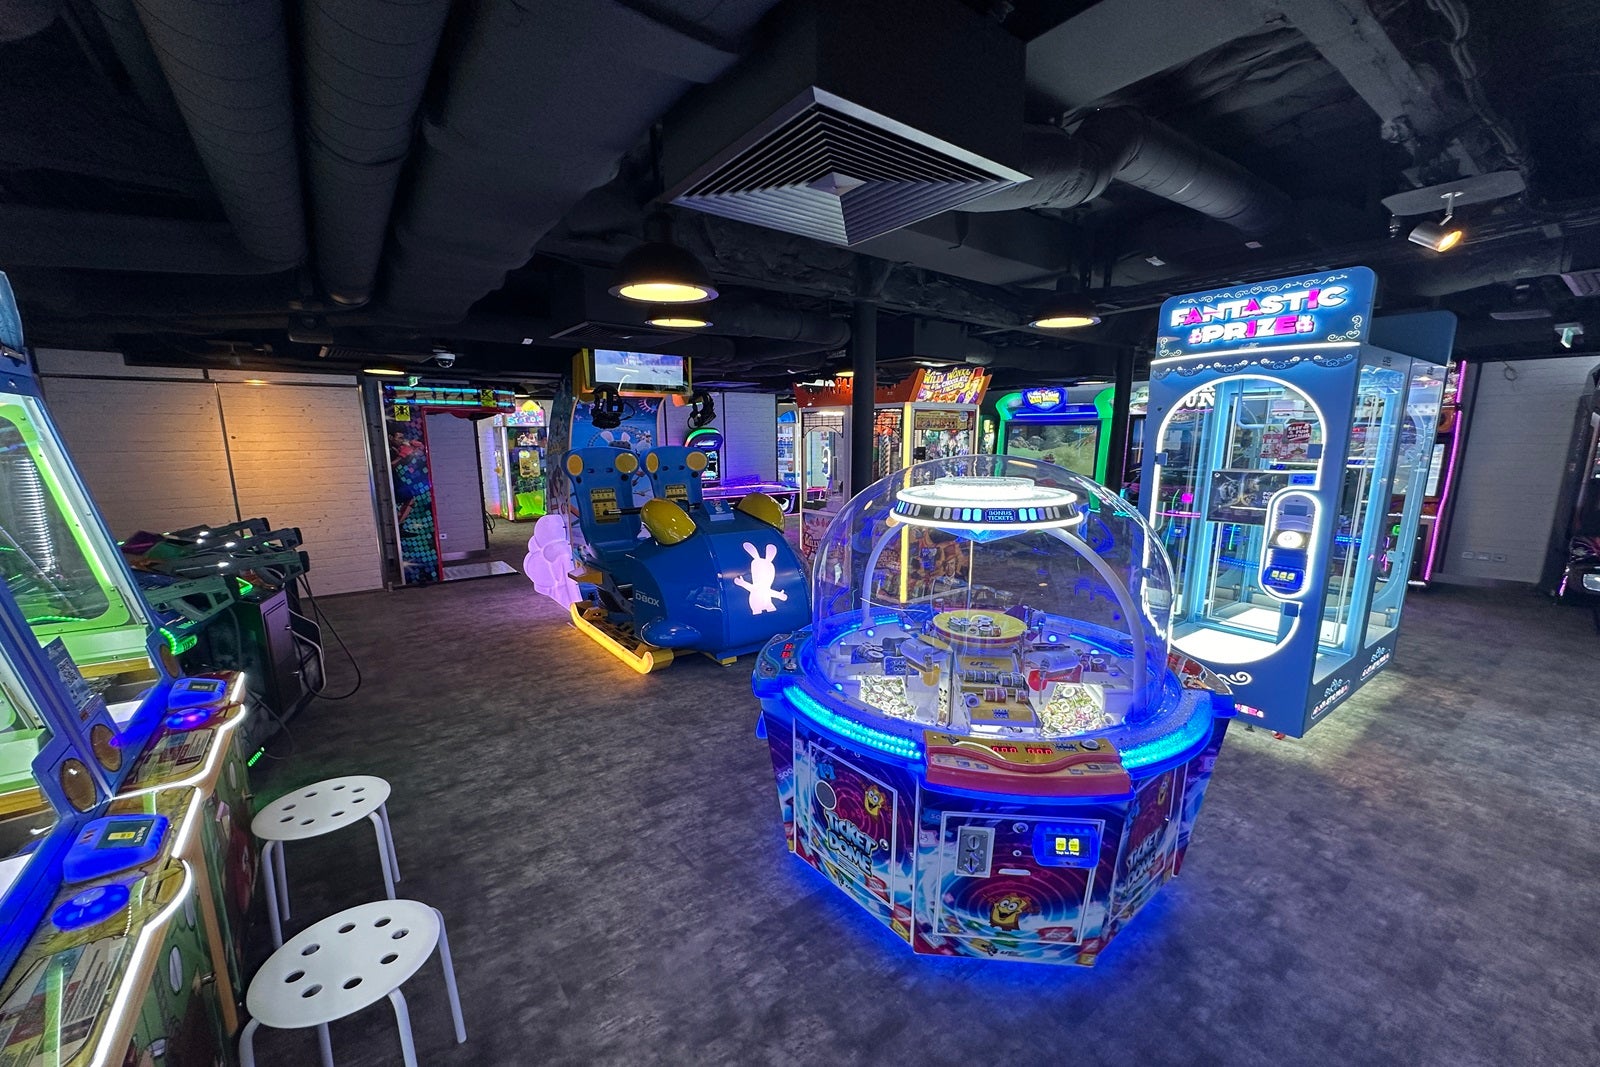 An arcade outfitted with games lit by neon lights